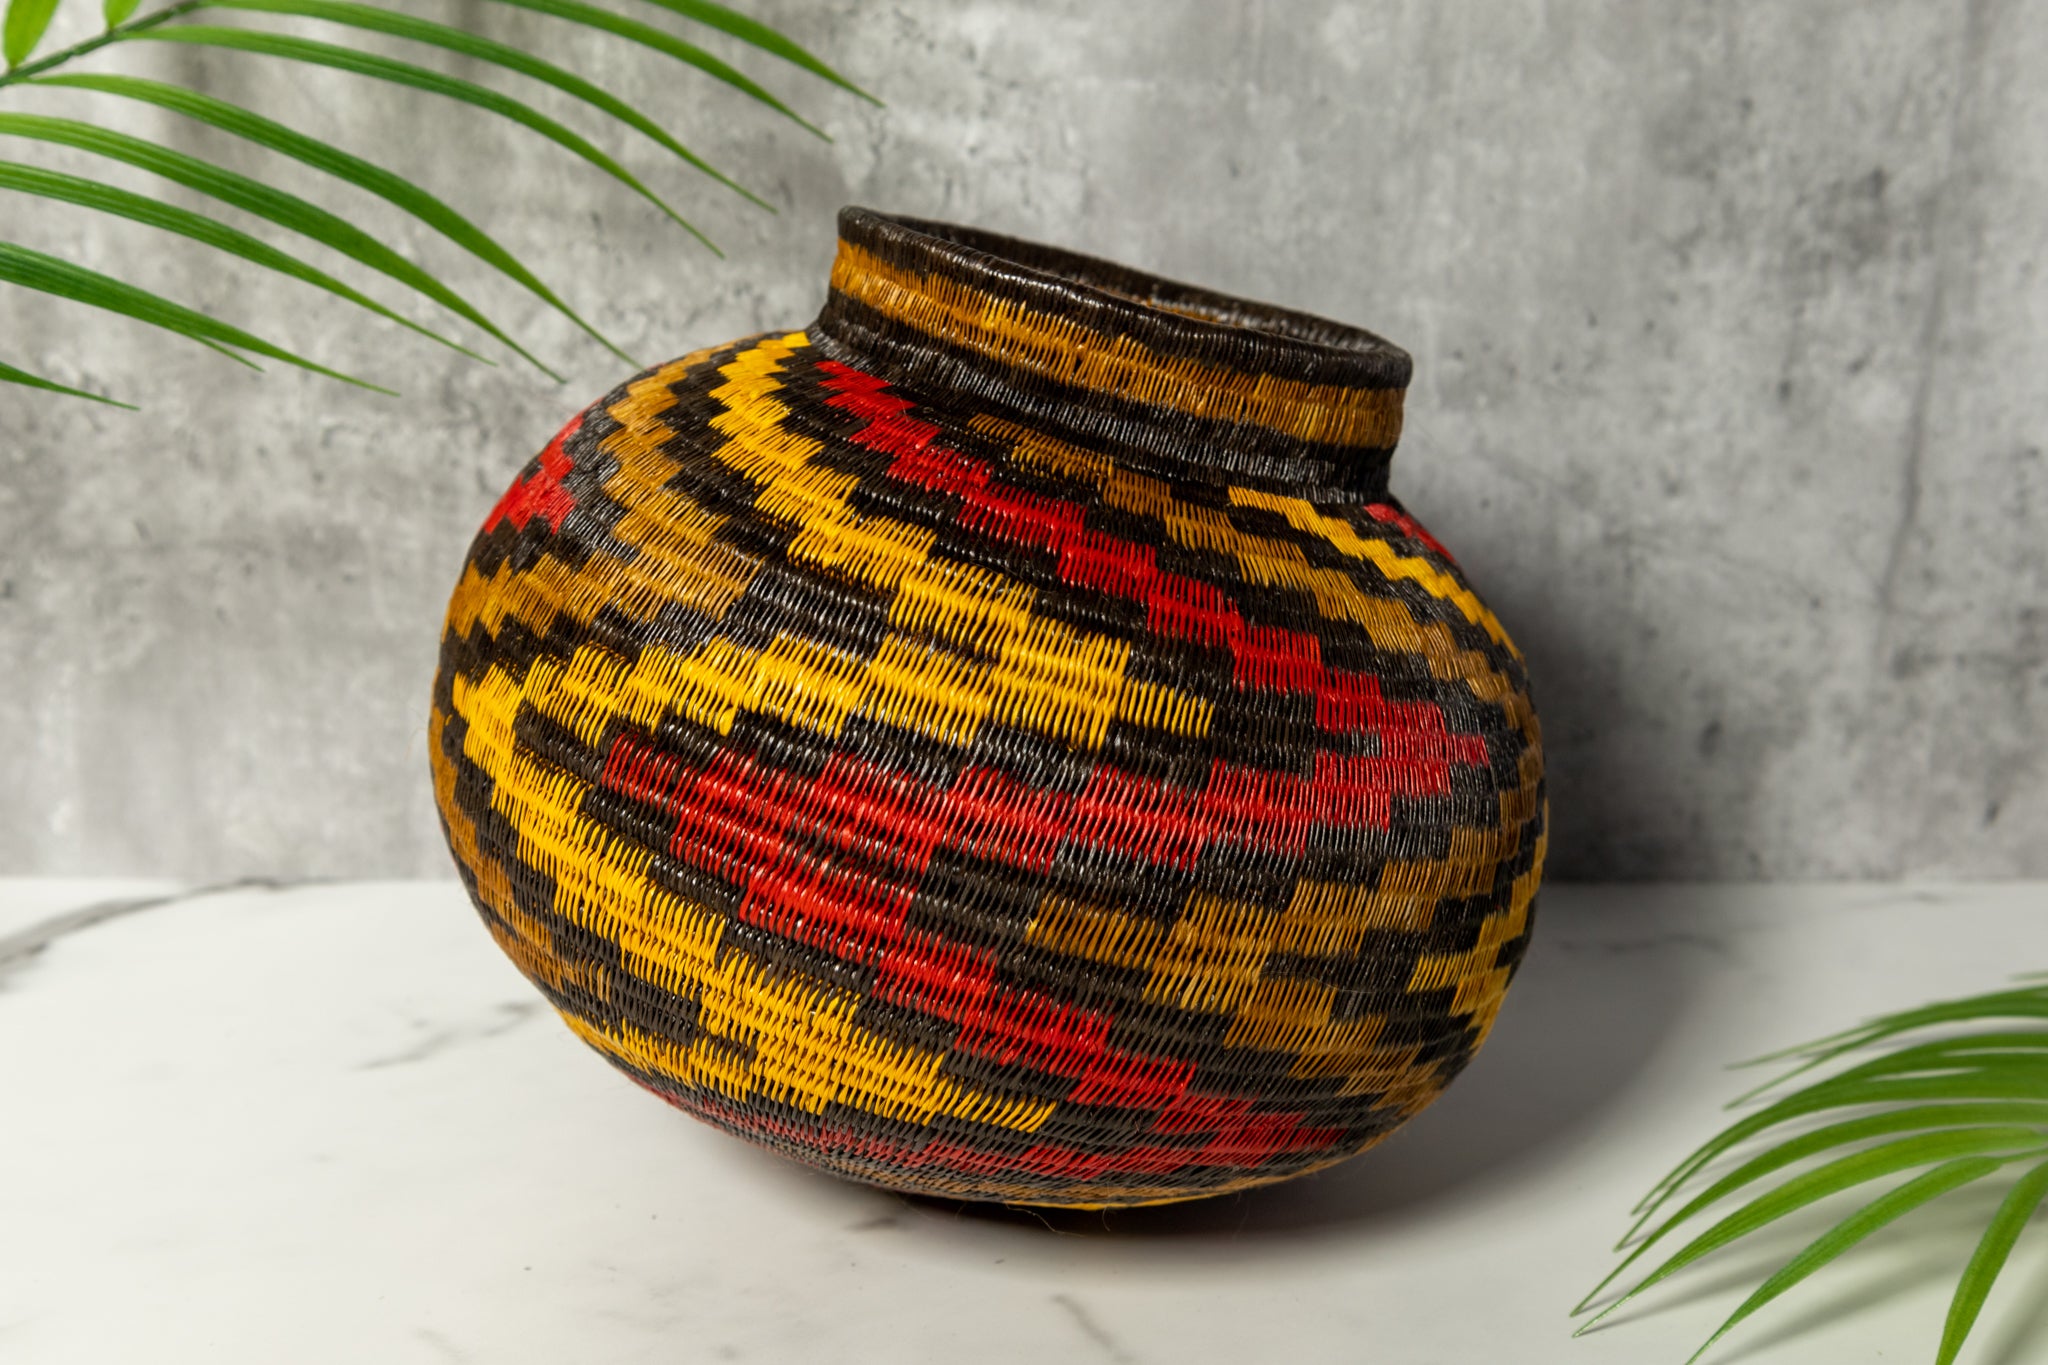 ZigZag Flames Of Fire Woven Basket